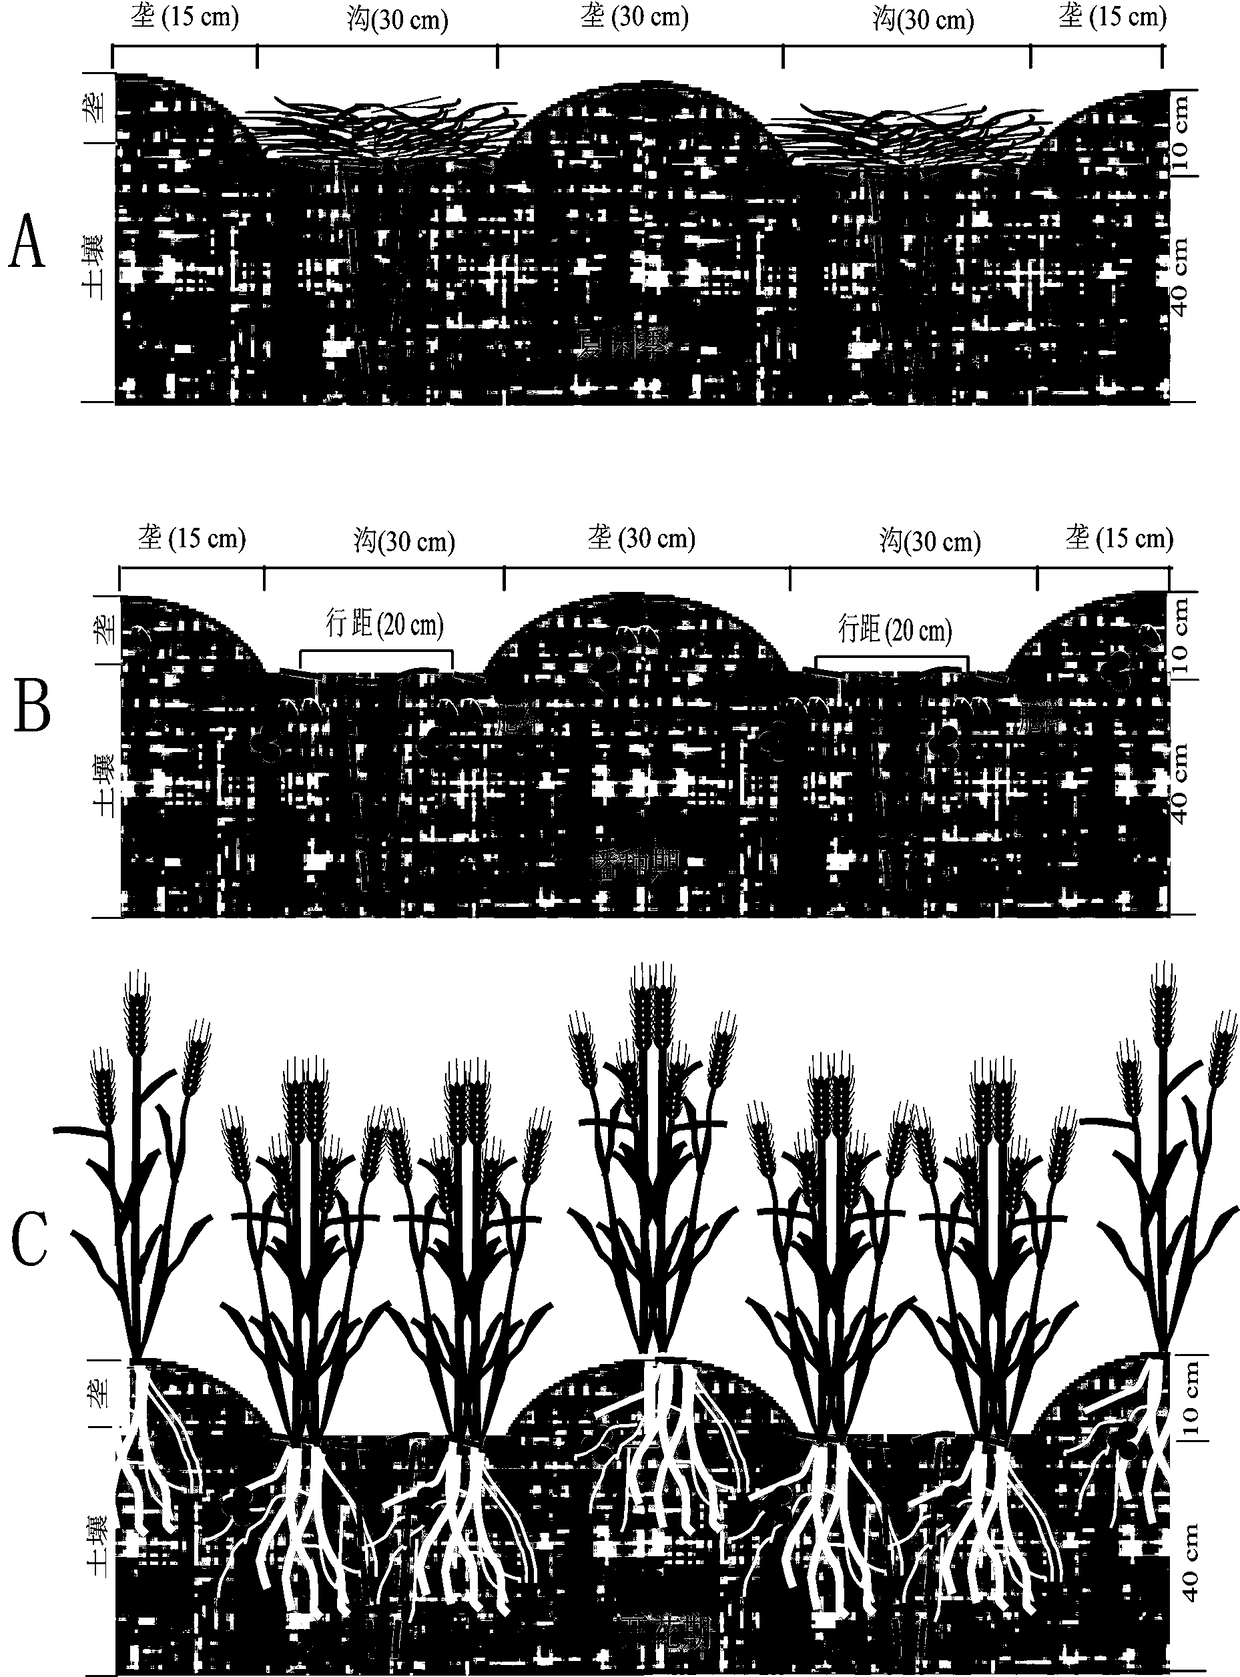 Method for planting winter wheat on concave-convex ground surfaces